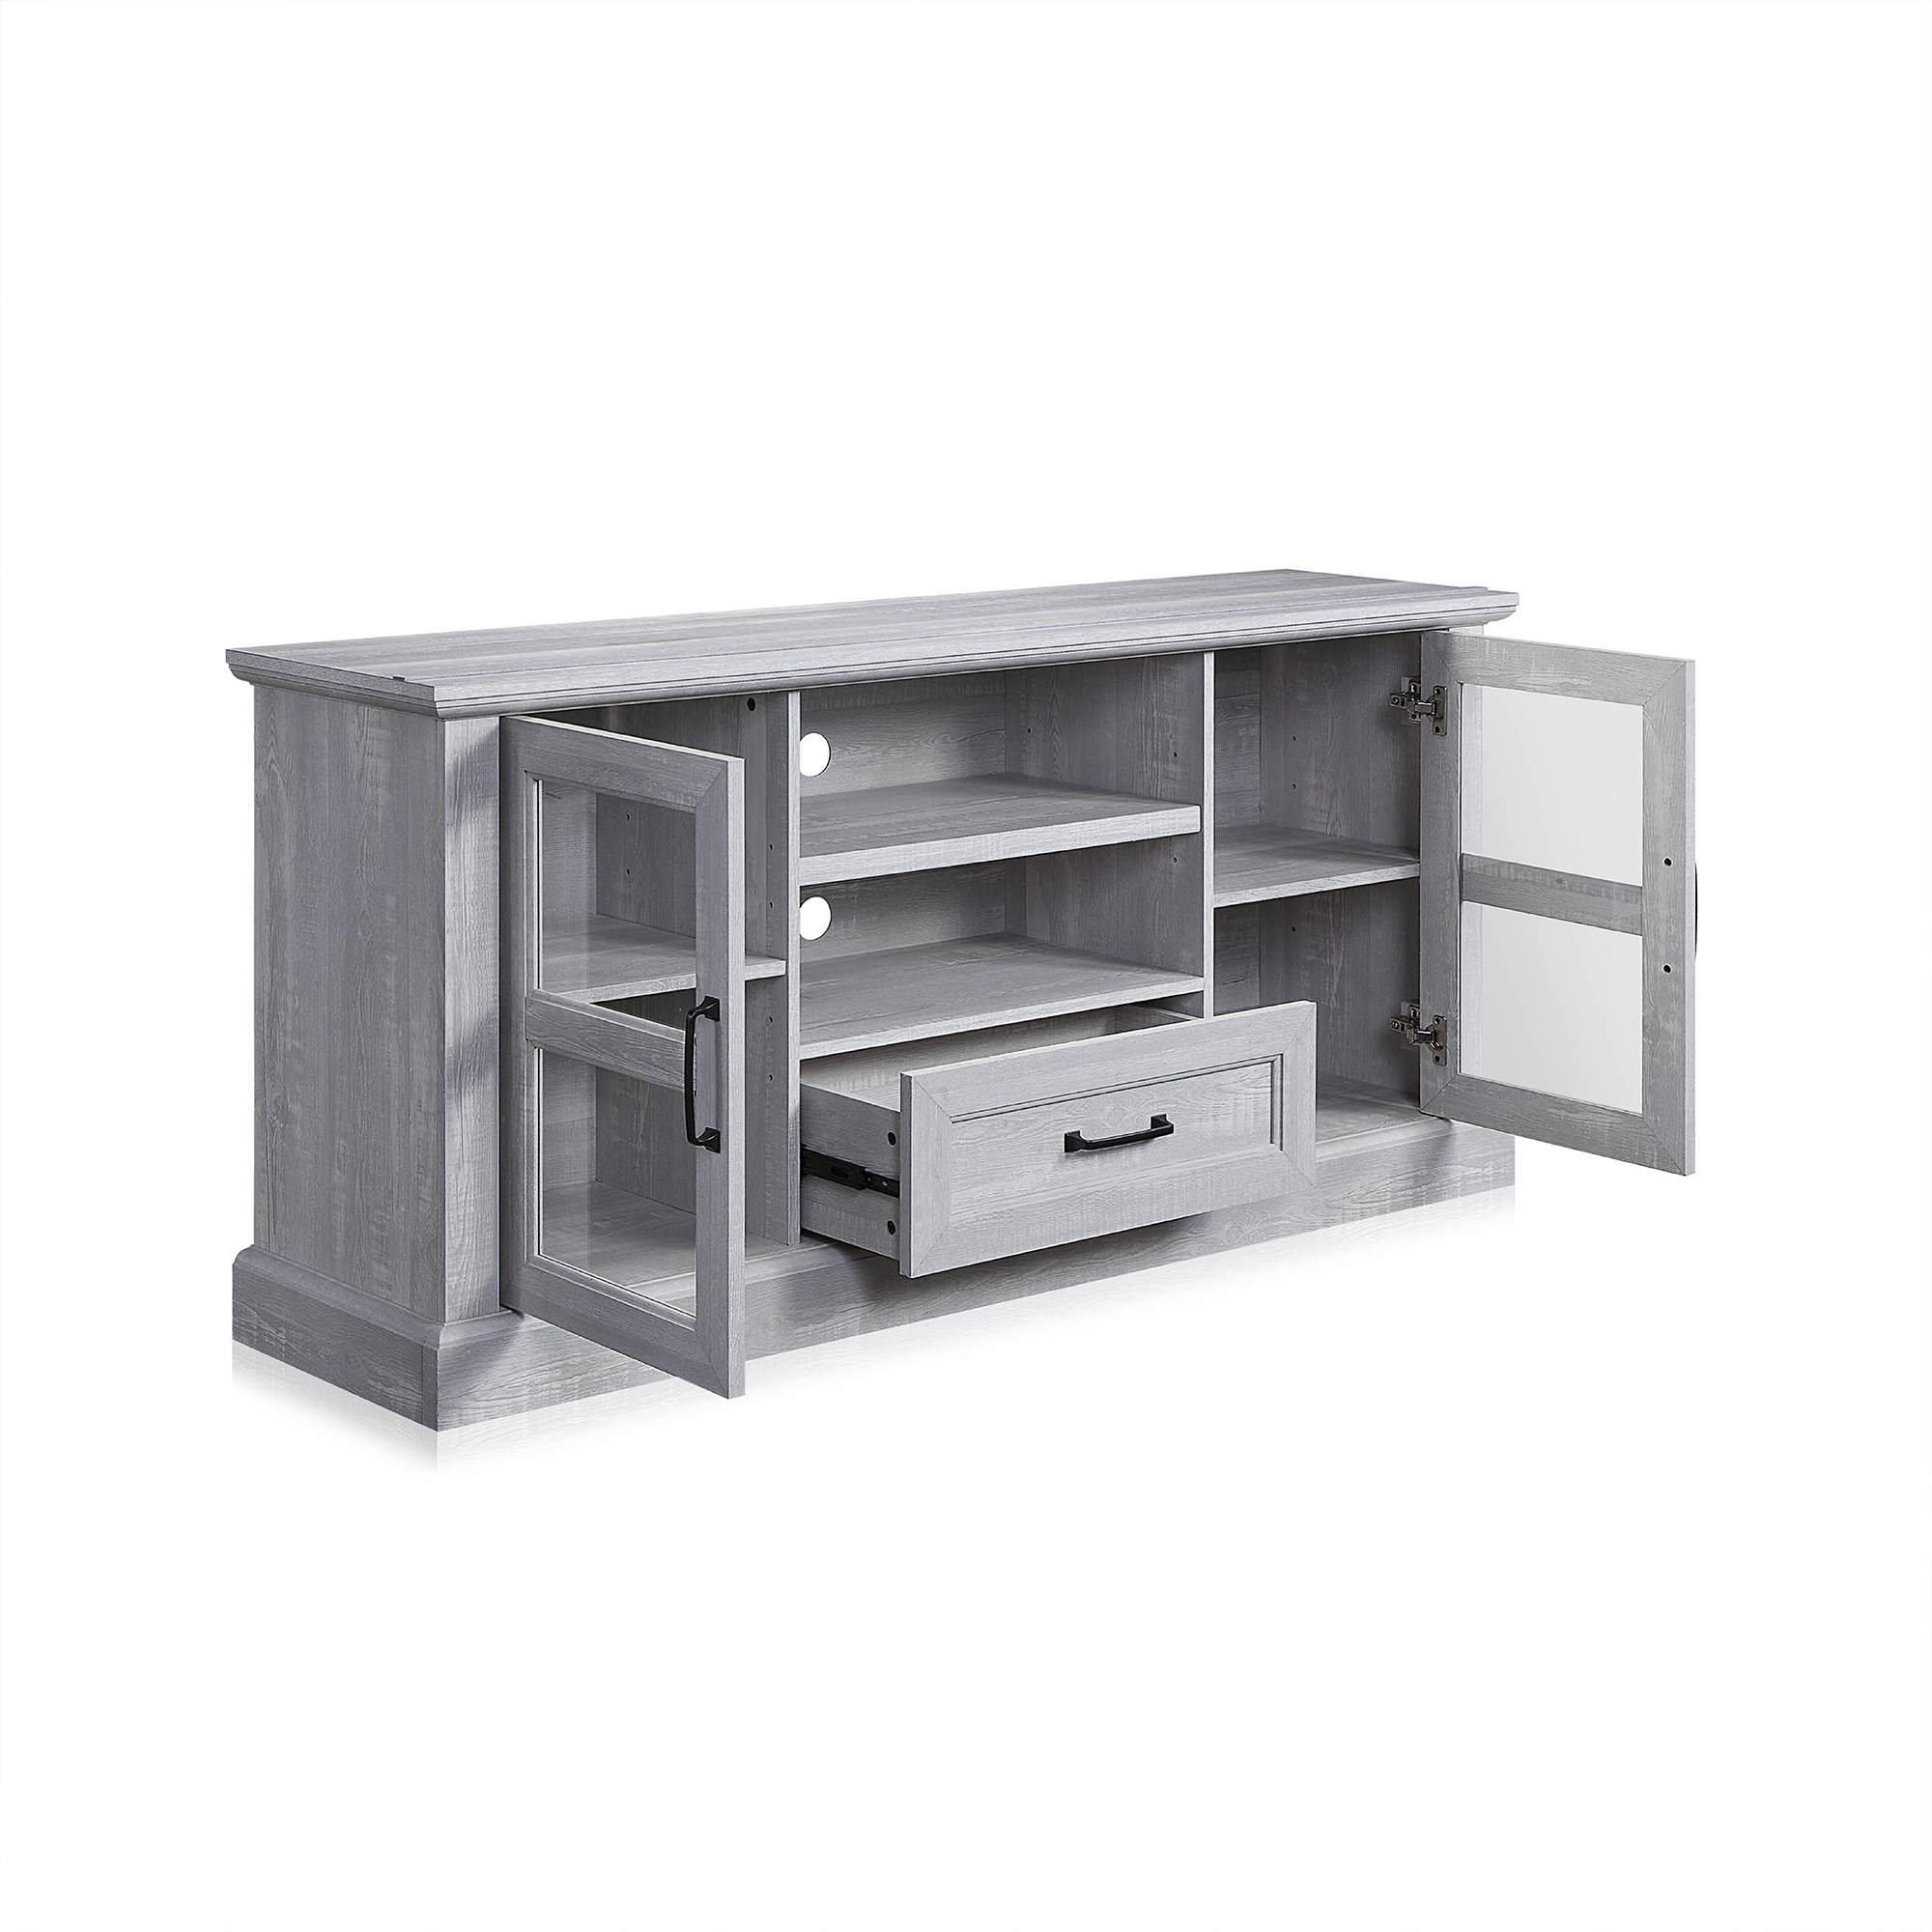 BELLEZE Rustic Modern TV Stand - Trussati (Stone Gray) - image 4 of 7